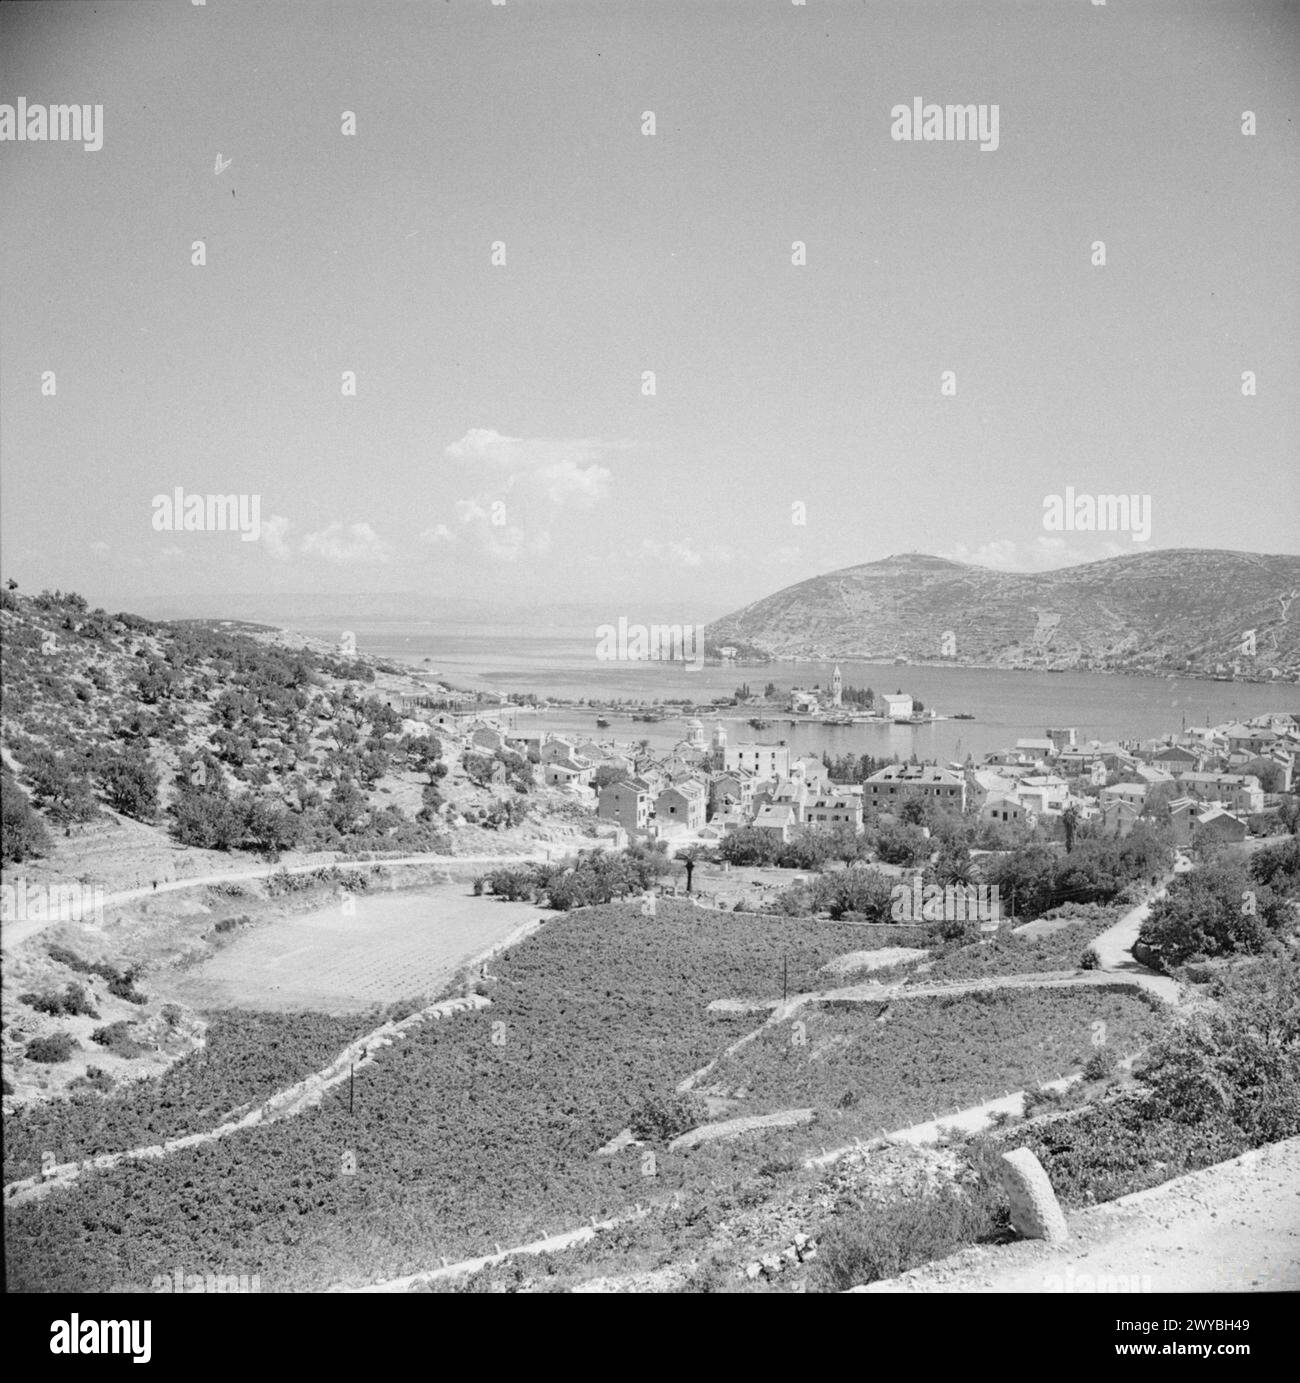 THE BRITISH ARMY IN THE ADRIATIC 1944 - Island of Vis off the coast of Yugoslavia. , Stock Photo